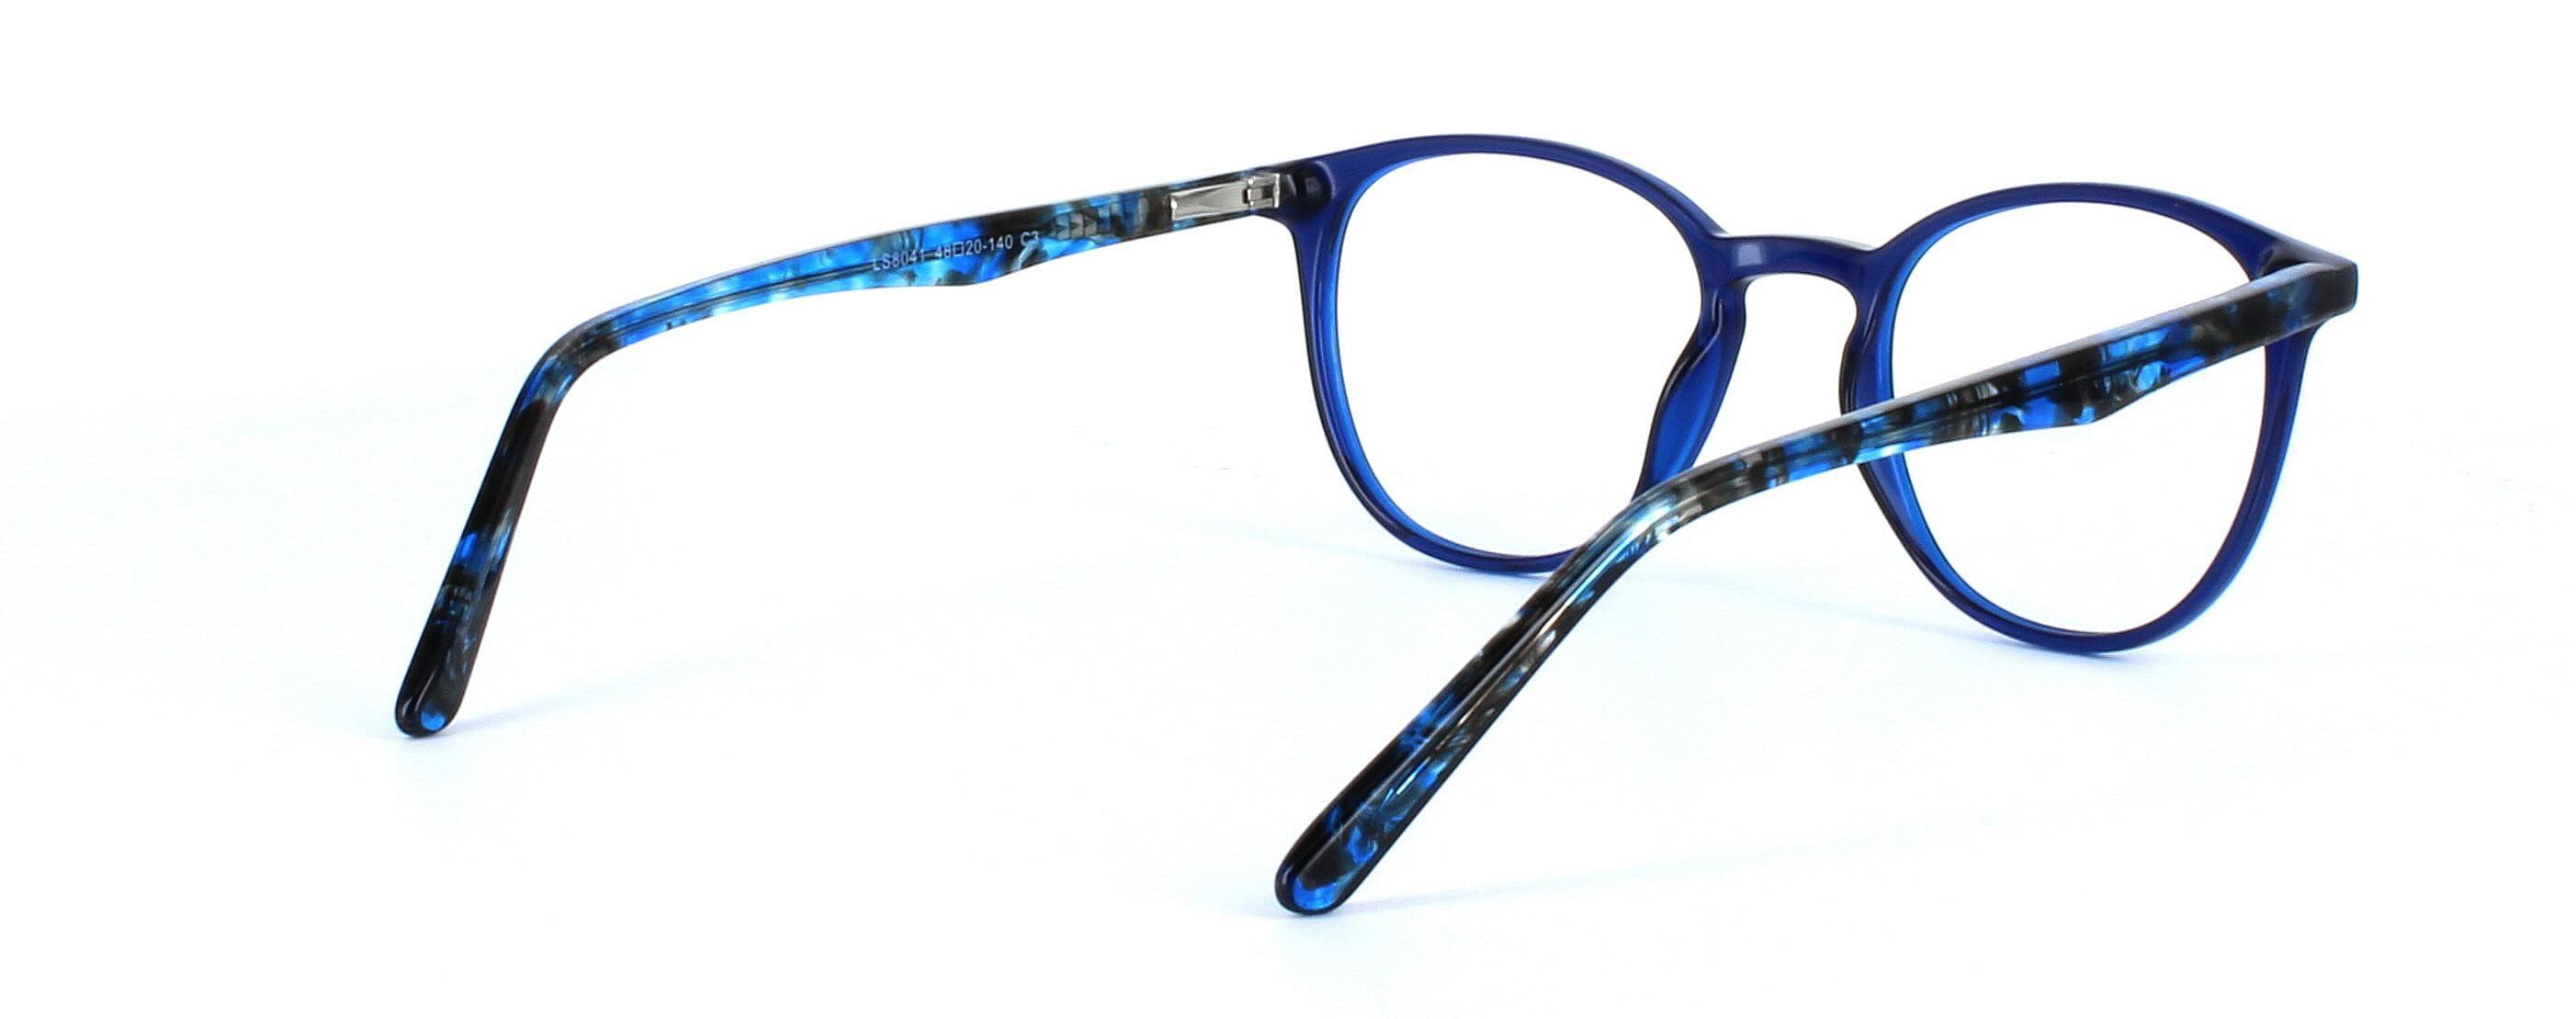 Canis - ladies plastic round shaped glasses frame in blue - image 4